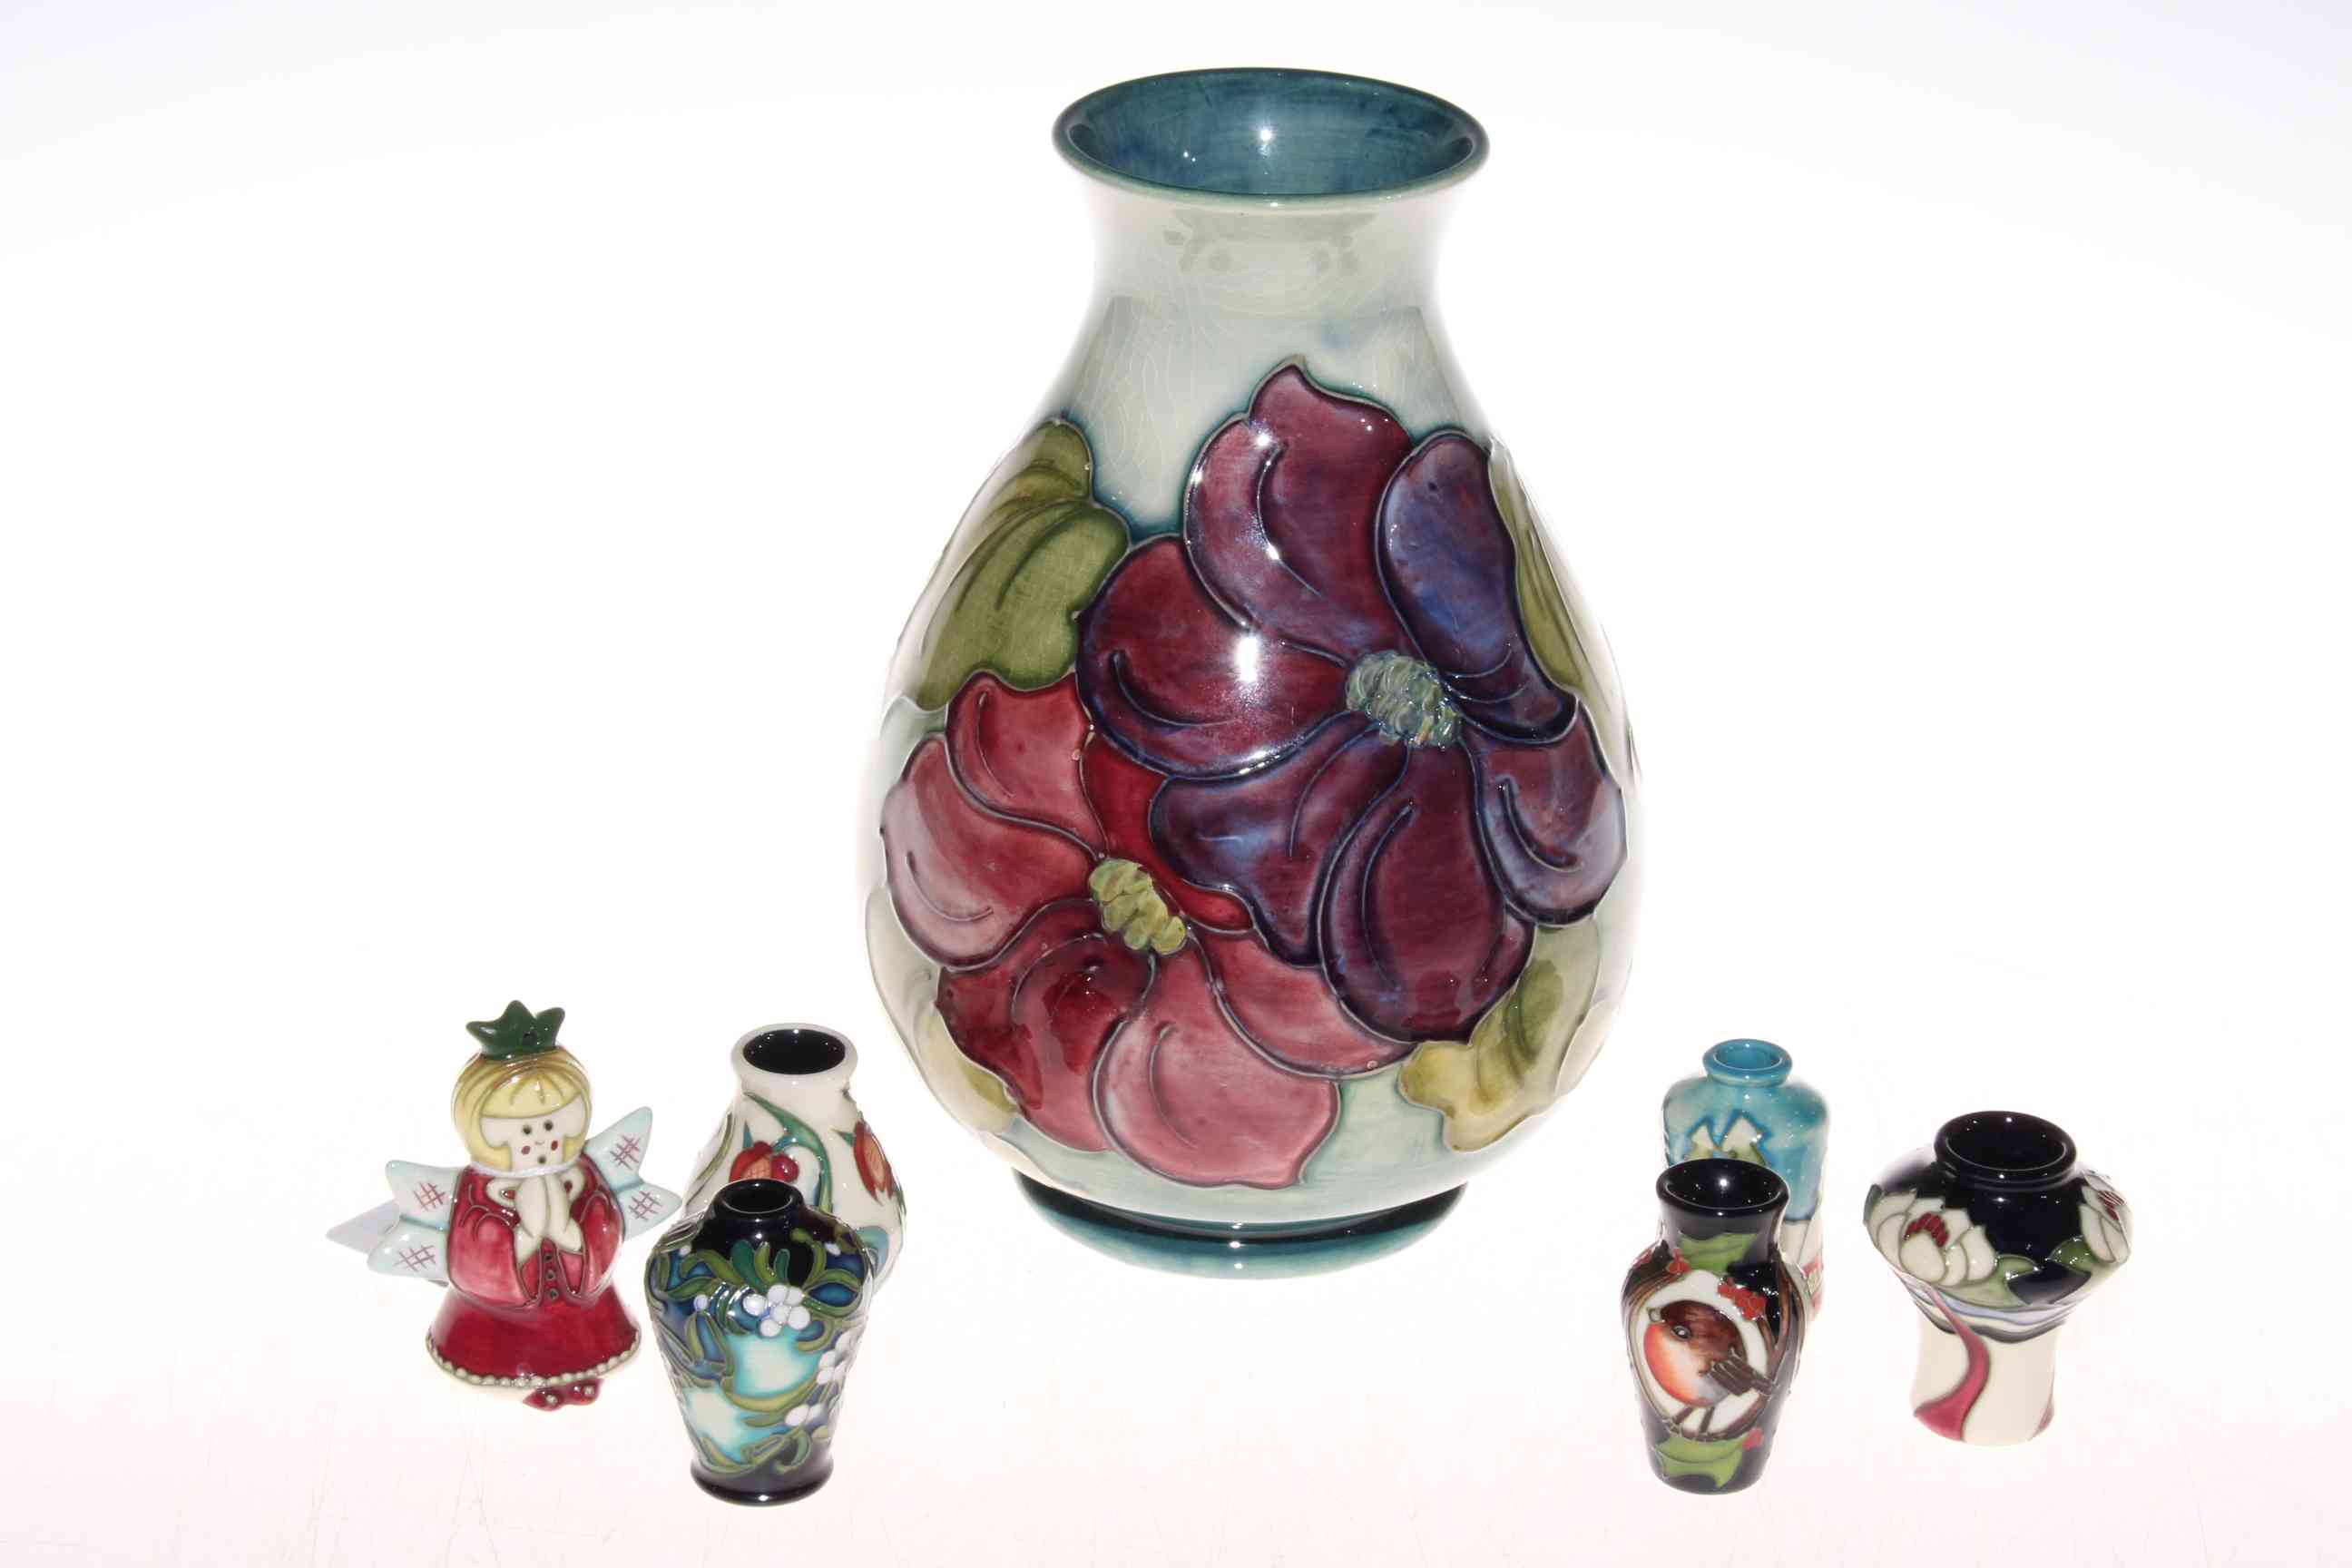 Moorcroft Clematis vase and five small Moorcroft vases and an angel figurine (7).